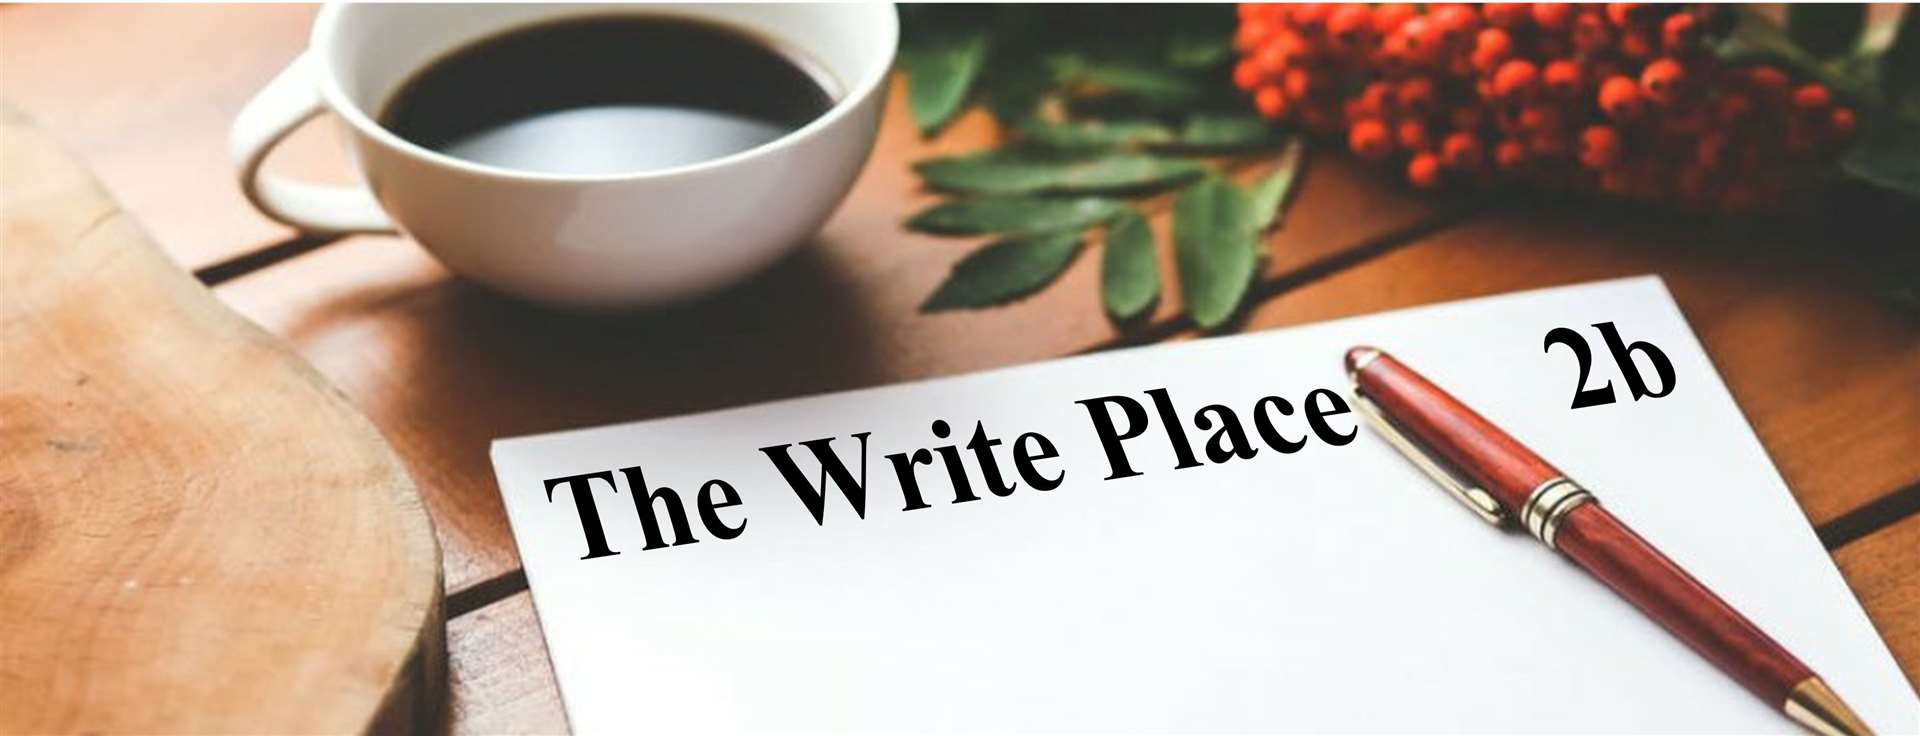 The logo of the Write Place 2b group.